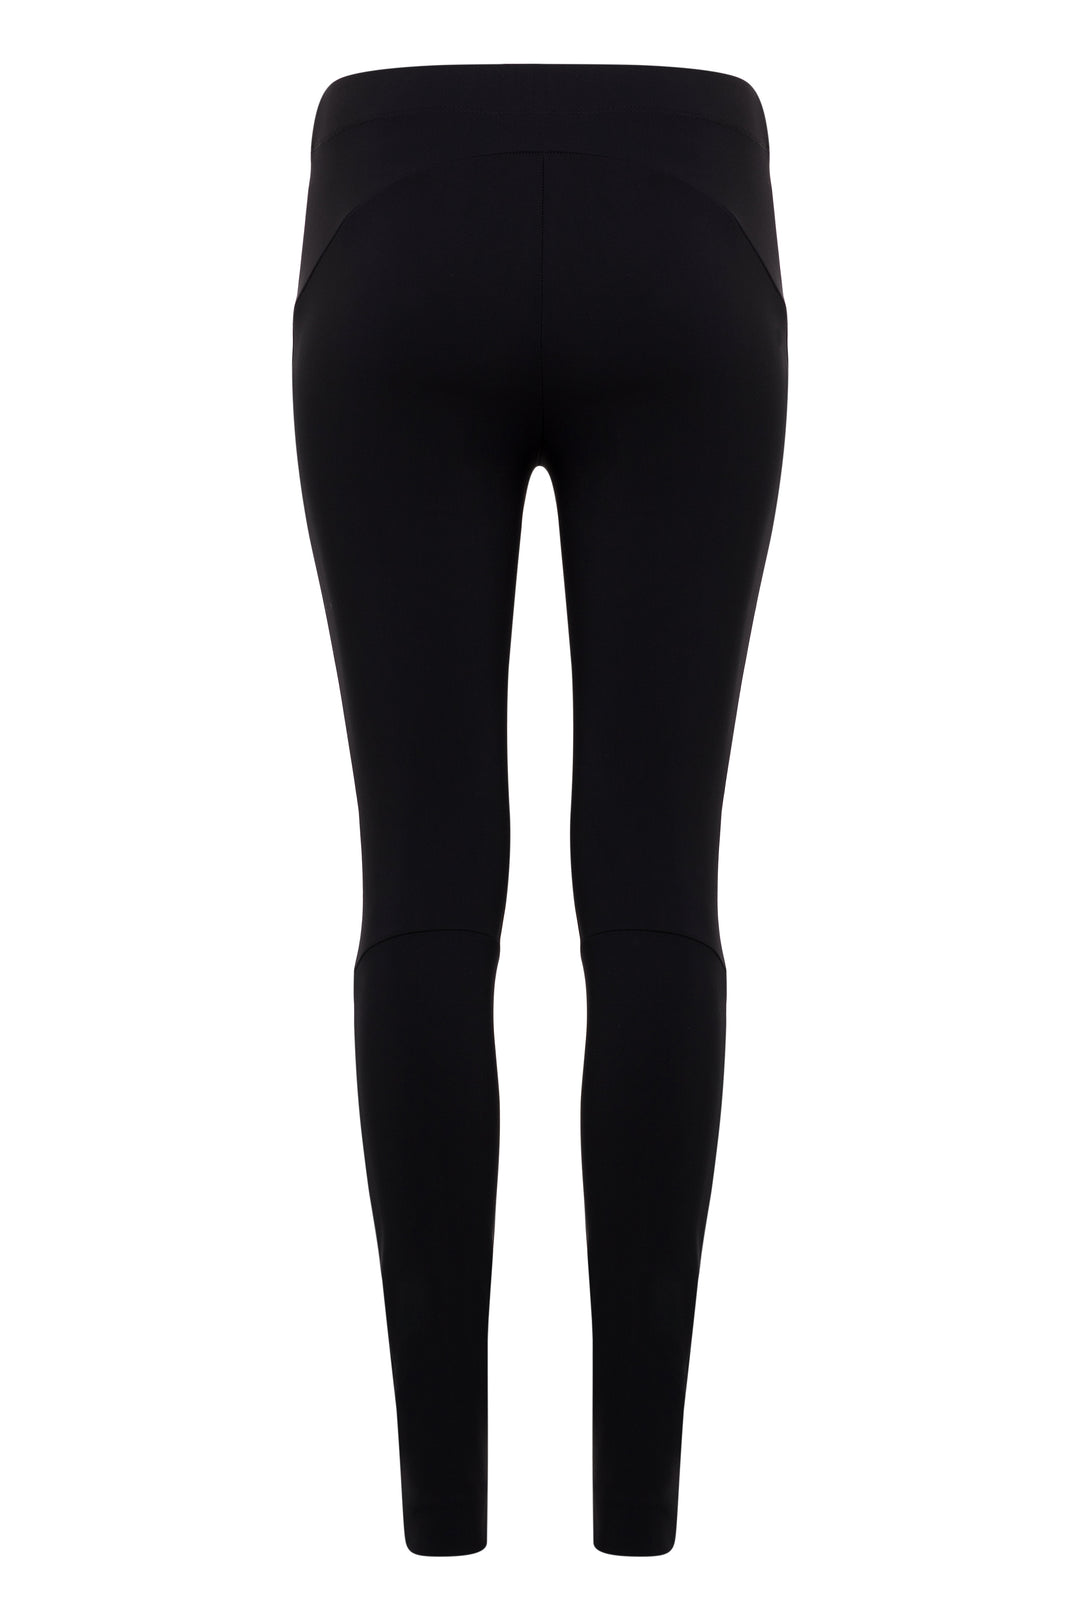 The Stacey - Legging